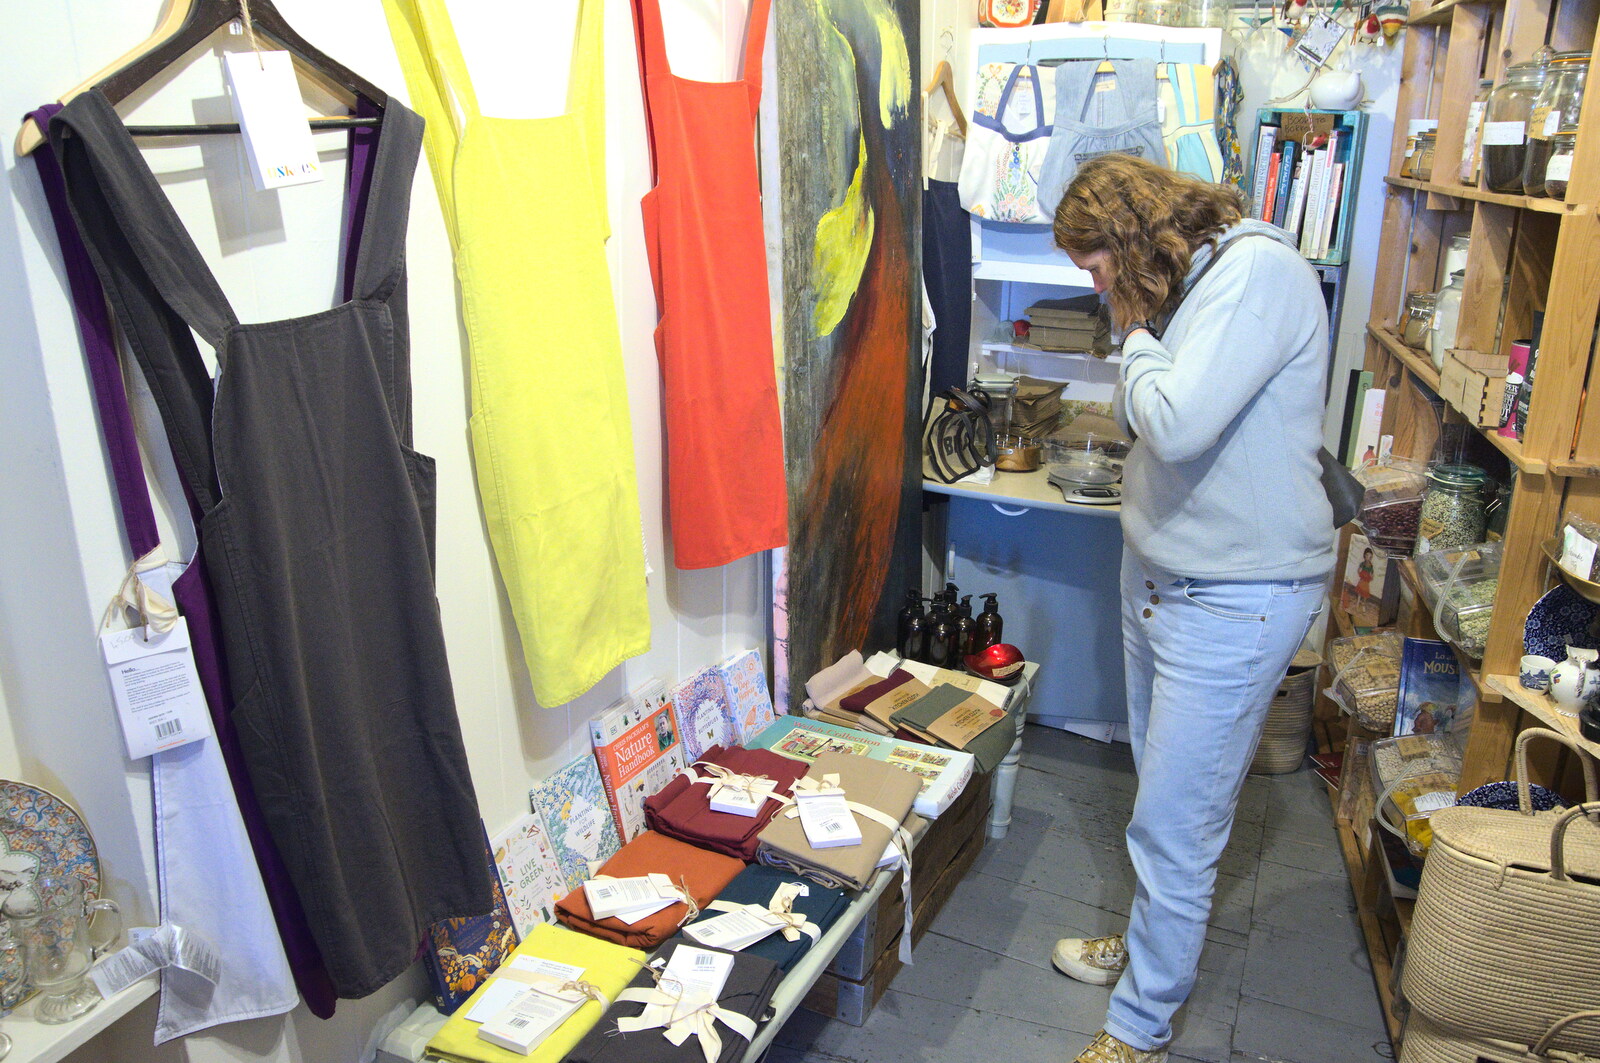 A Postcard from Bungay, Suffolk - 2nd November 2022: Isobel looks at stuff in the shop